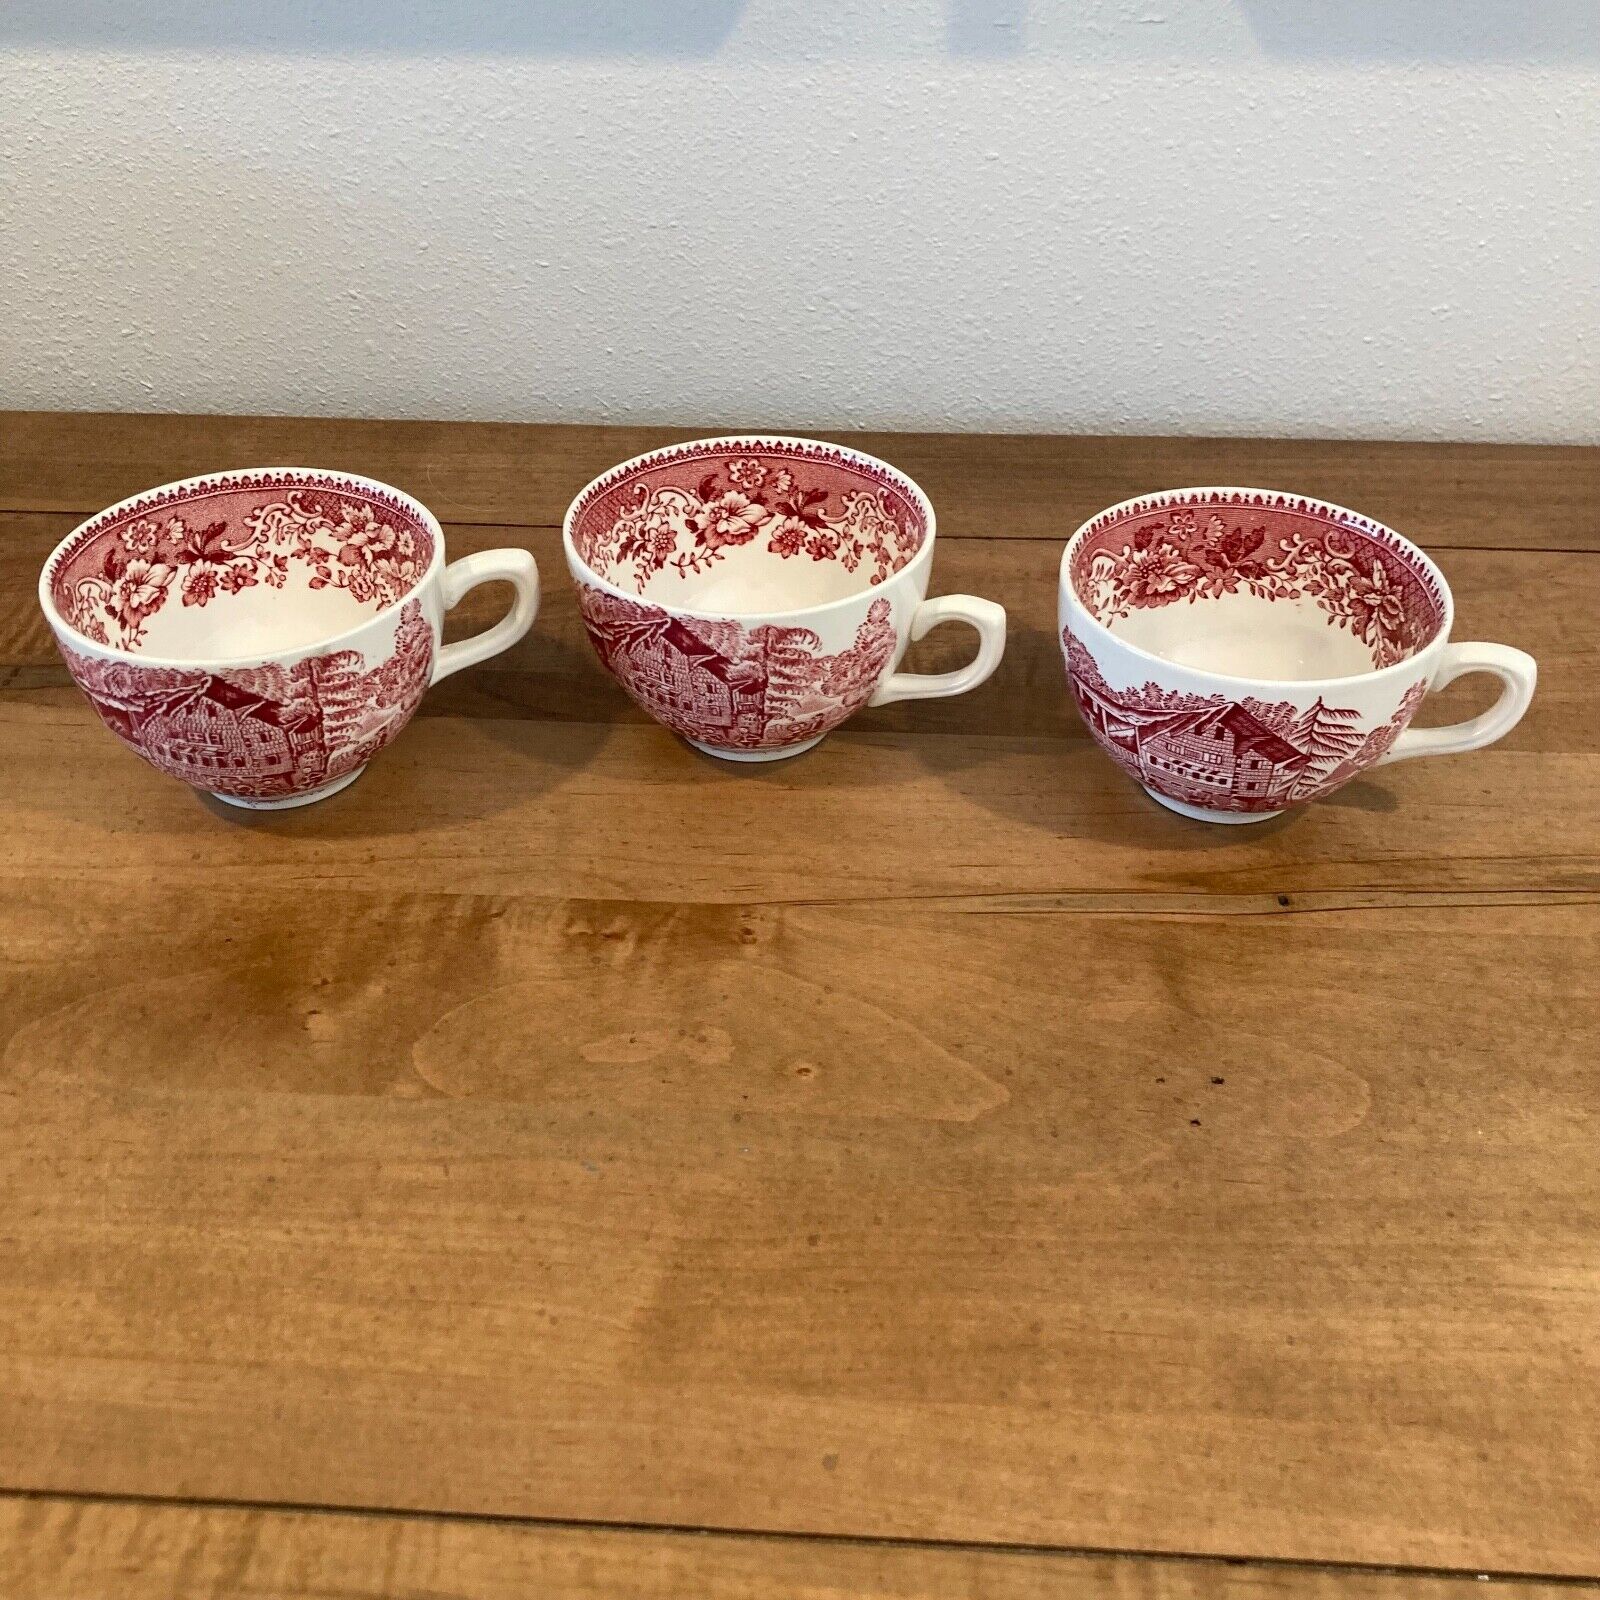 Avon Cottage - WEDGWOOD & CO - England Red Teacup